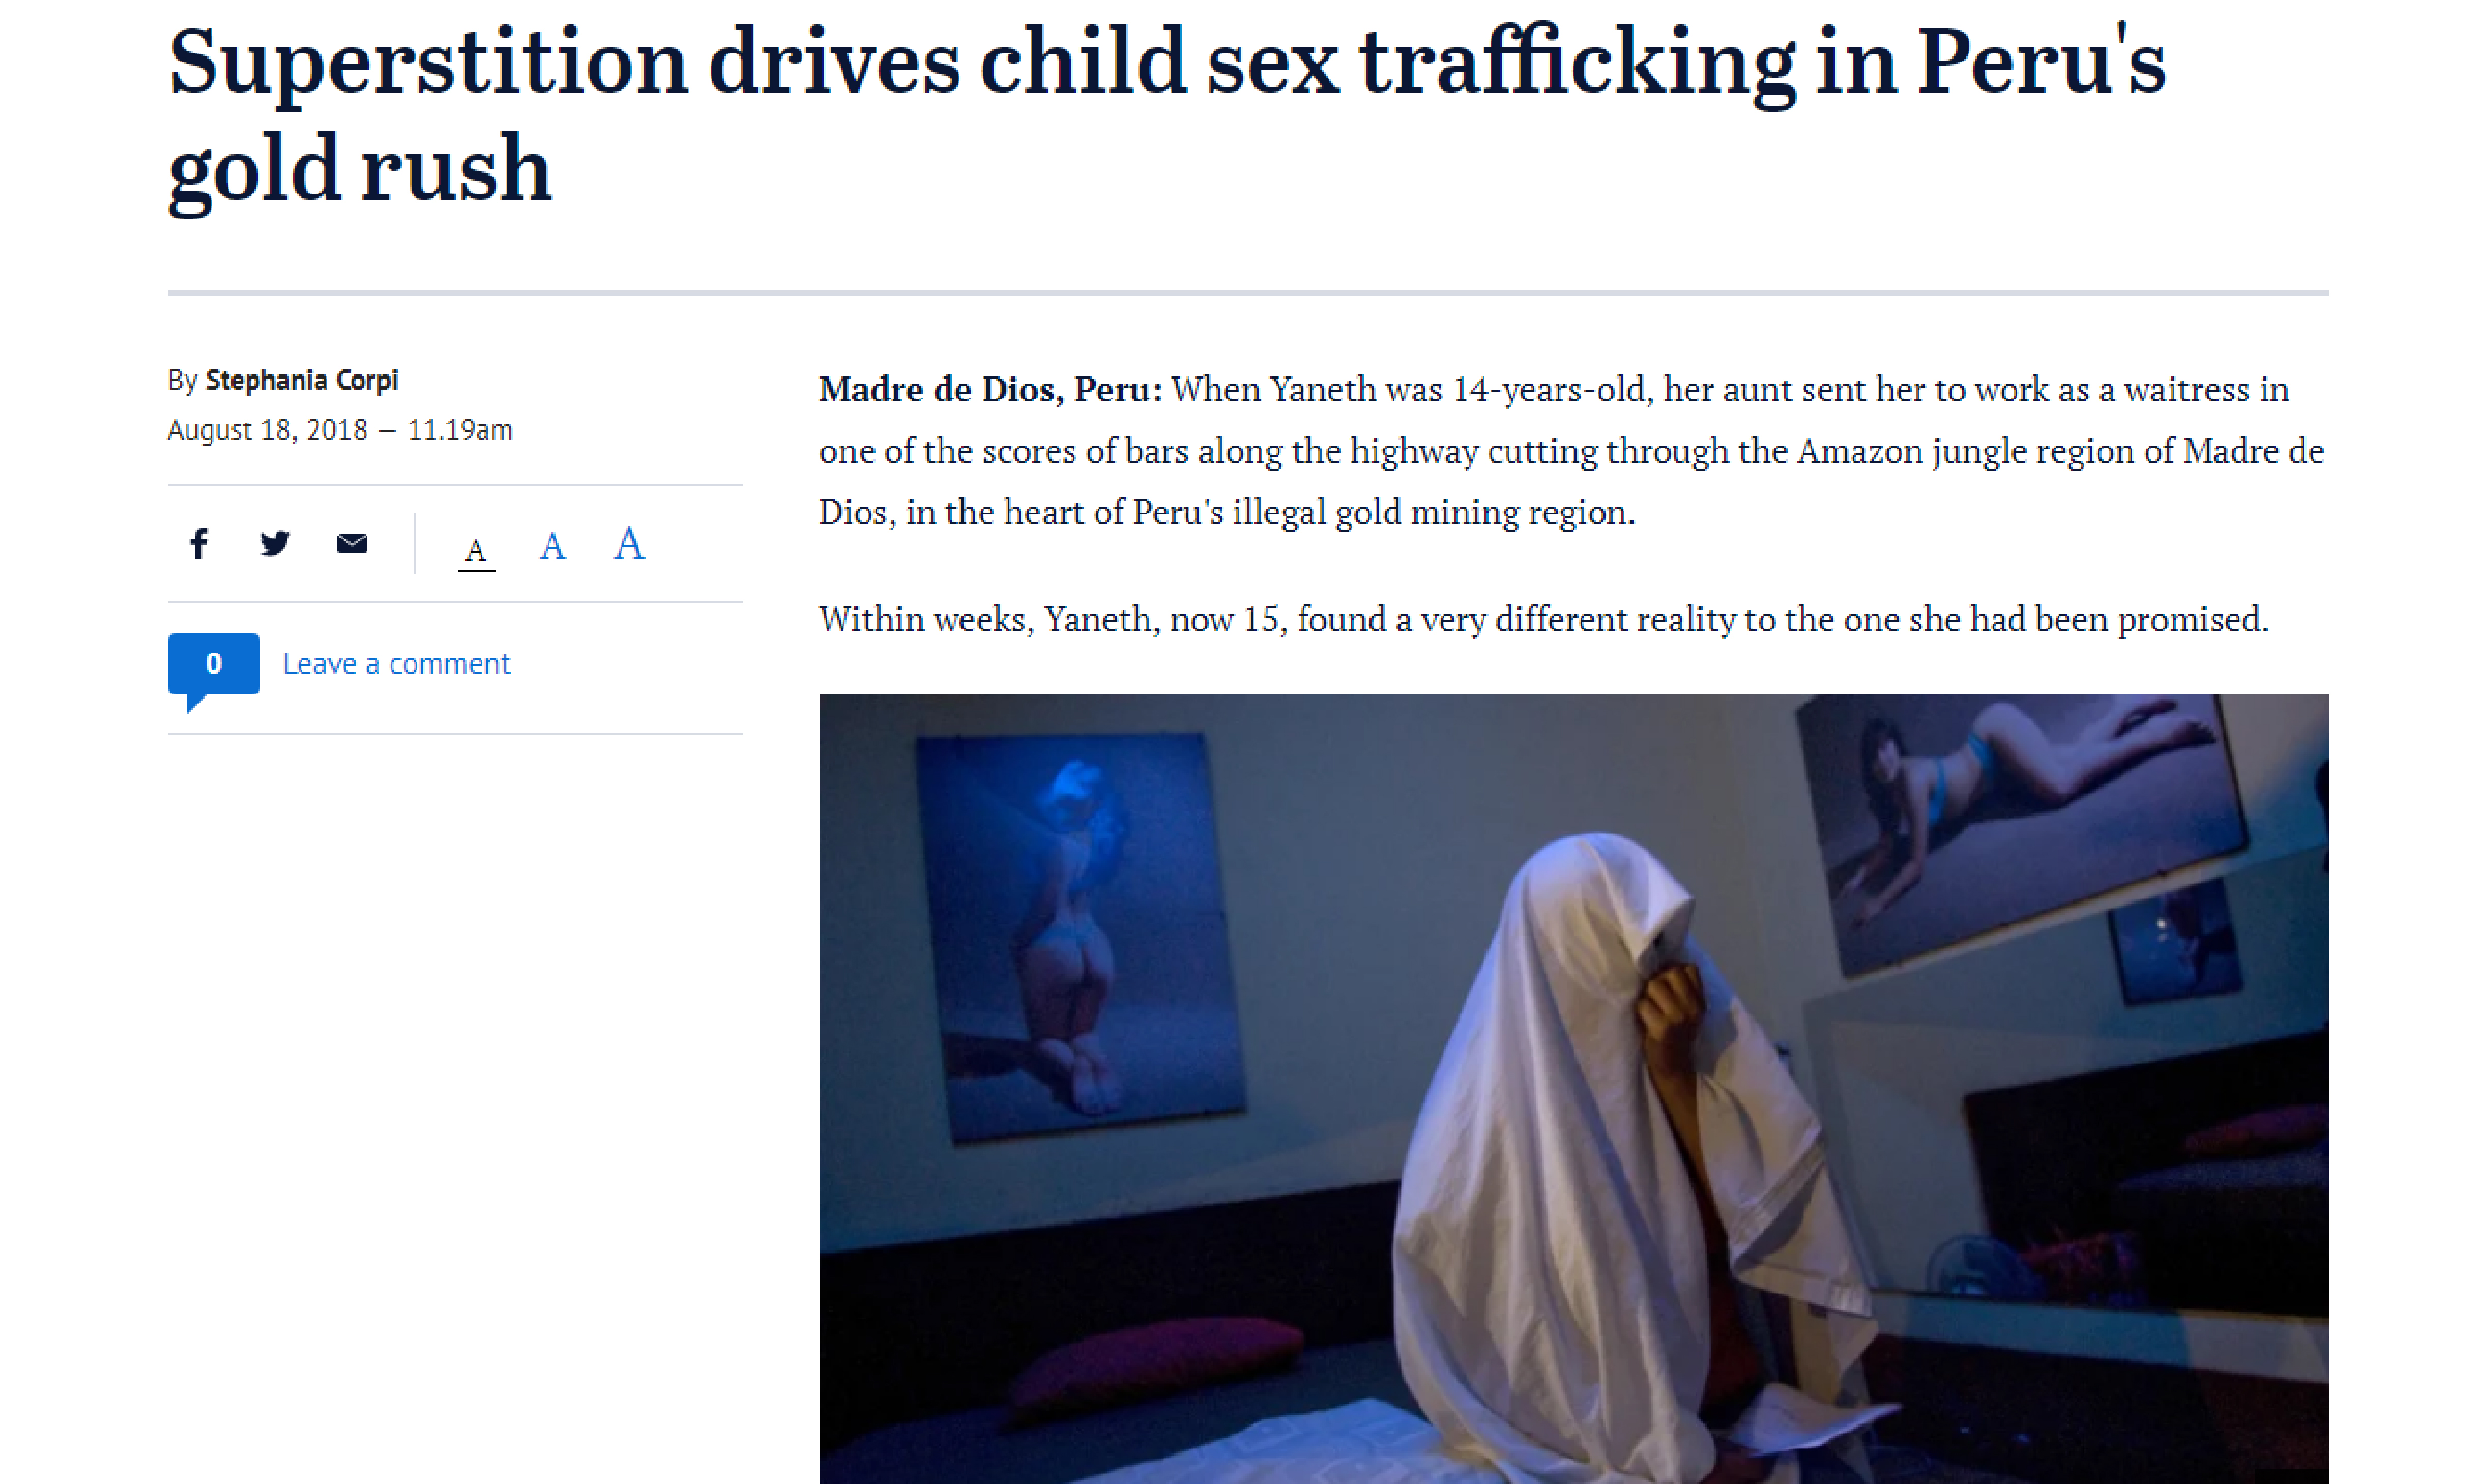 Superstition drives child sex trafficking in Peru’s gold rush